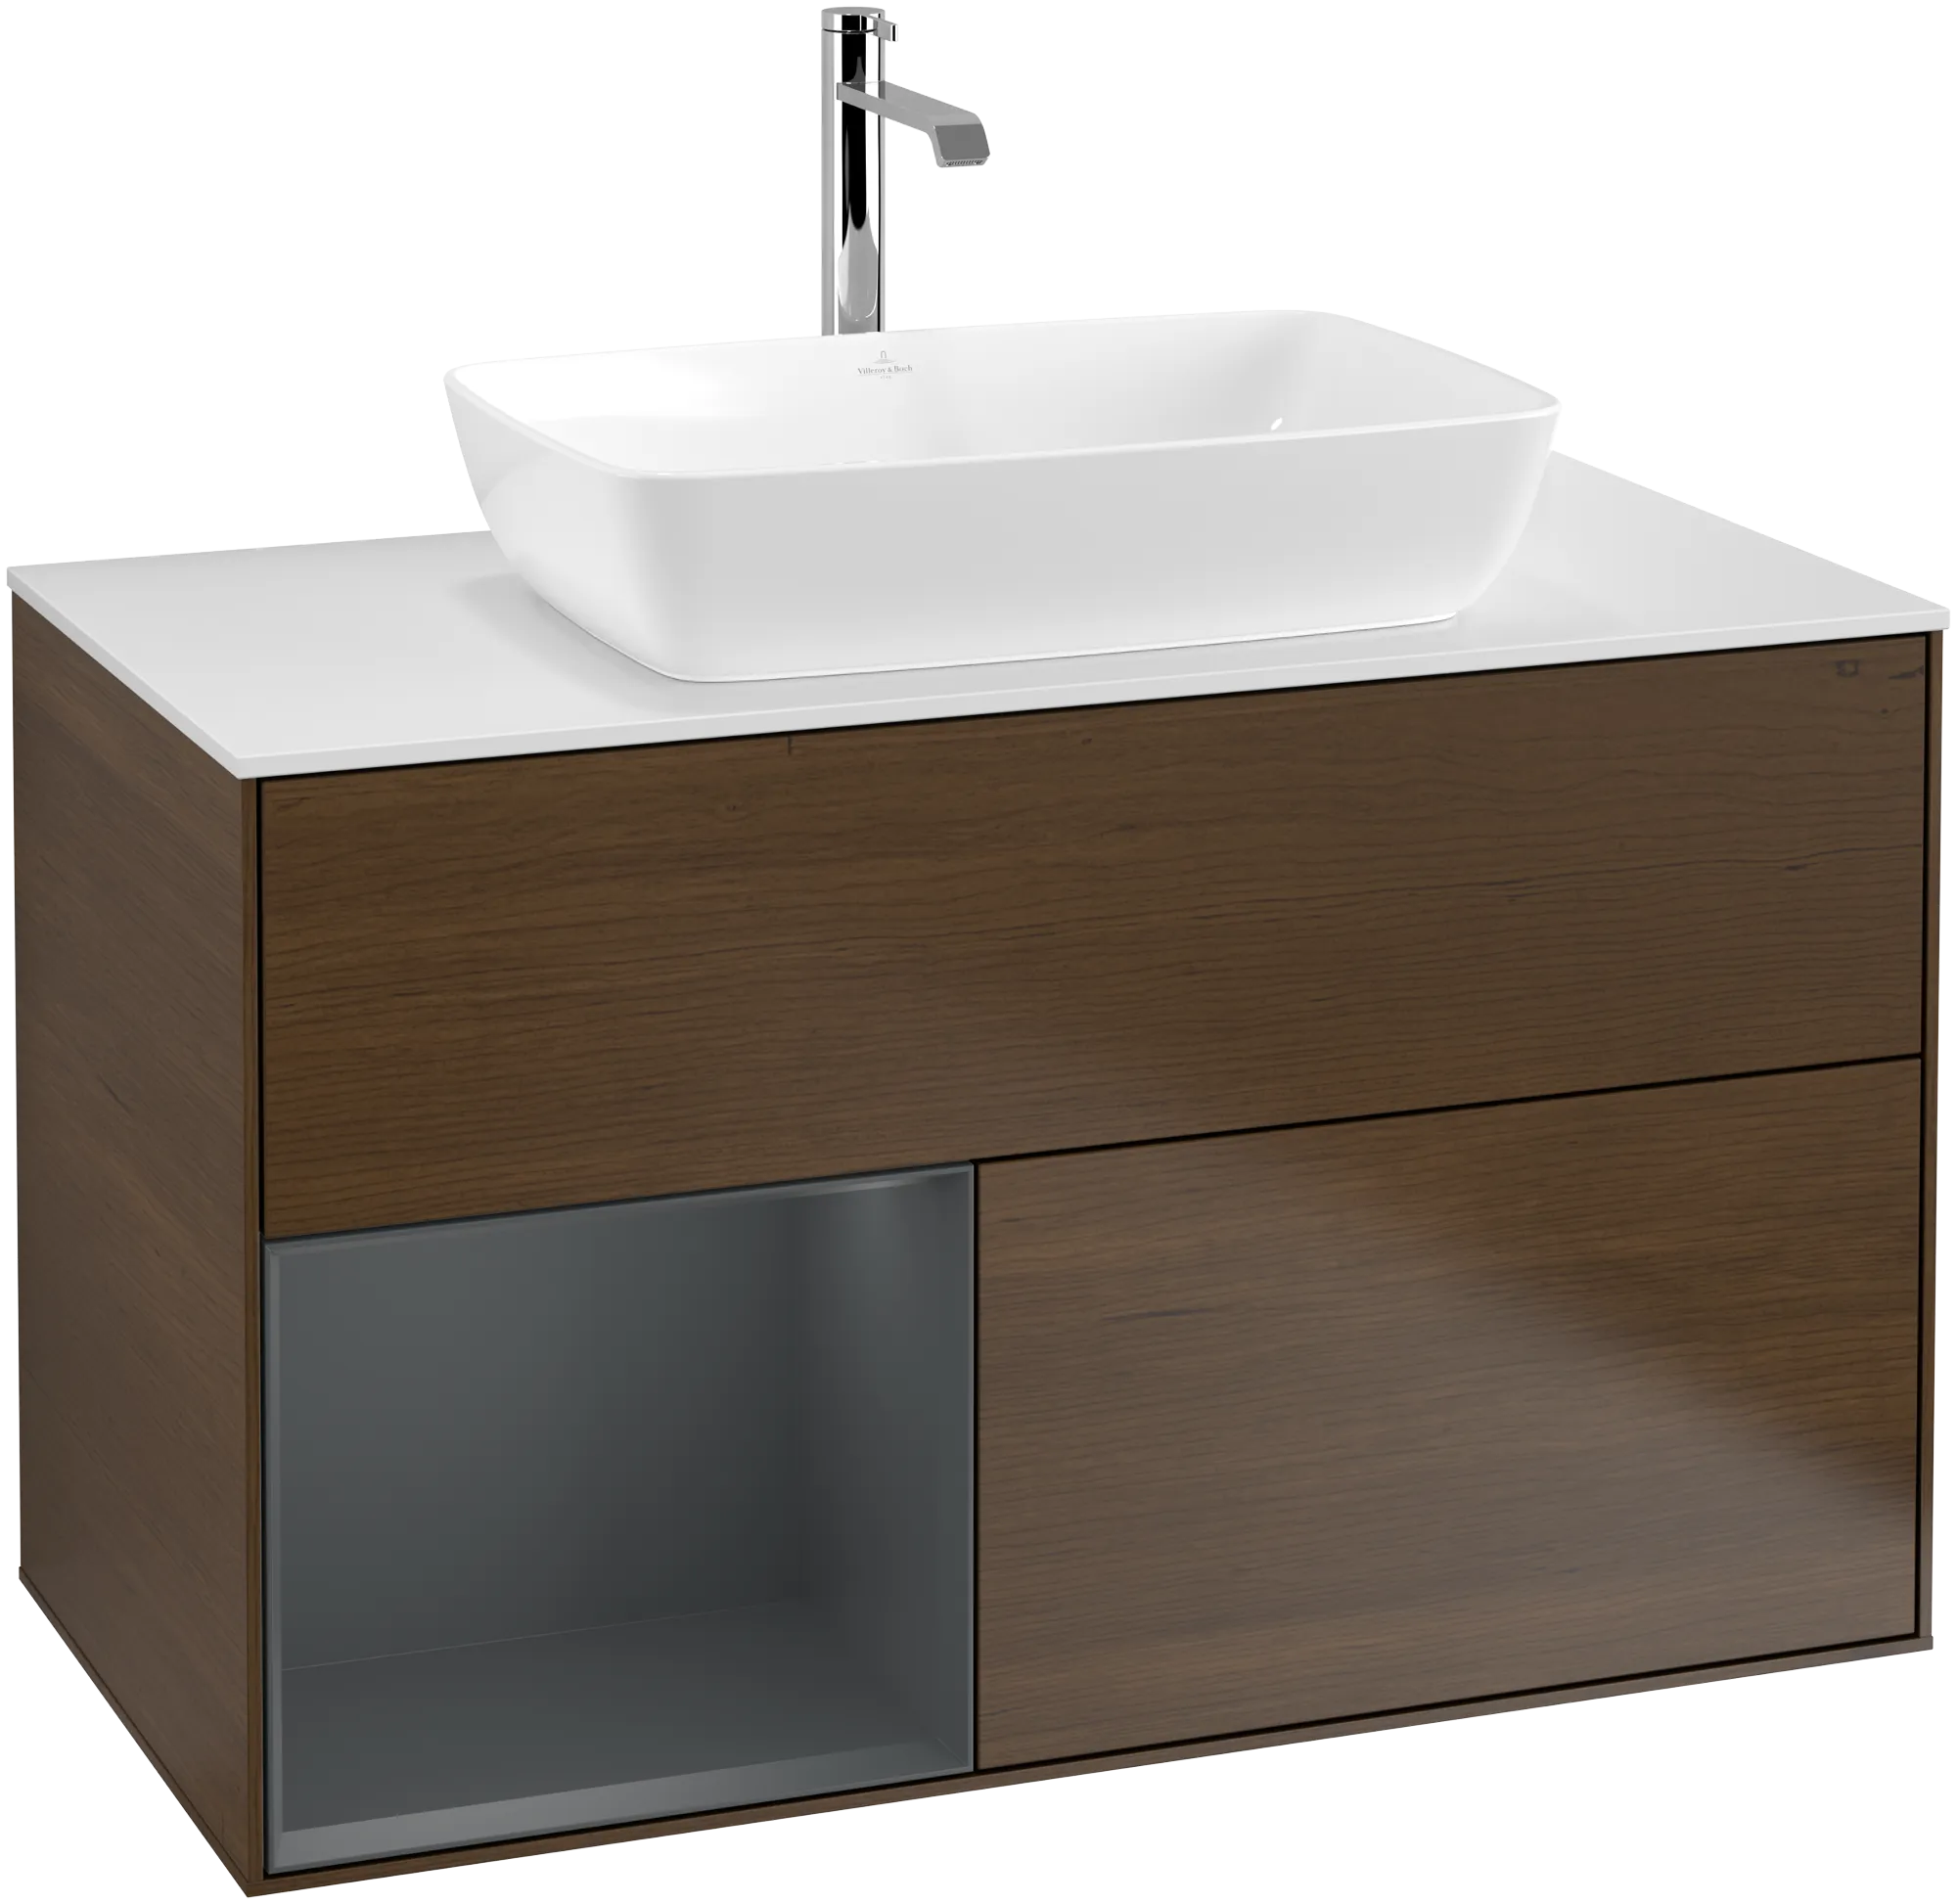 Picture of VILLEROY BOCH Finion Vanity unit, with lighting, 2 pull-out compartments, 1000 x 603 x 501 mm, Walnut Veneer / Midnight Blue Matt Lacquer / Glass White Matt #G771HGGN